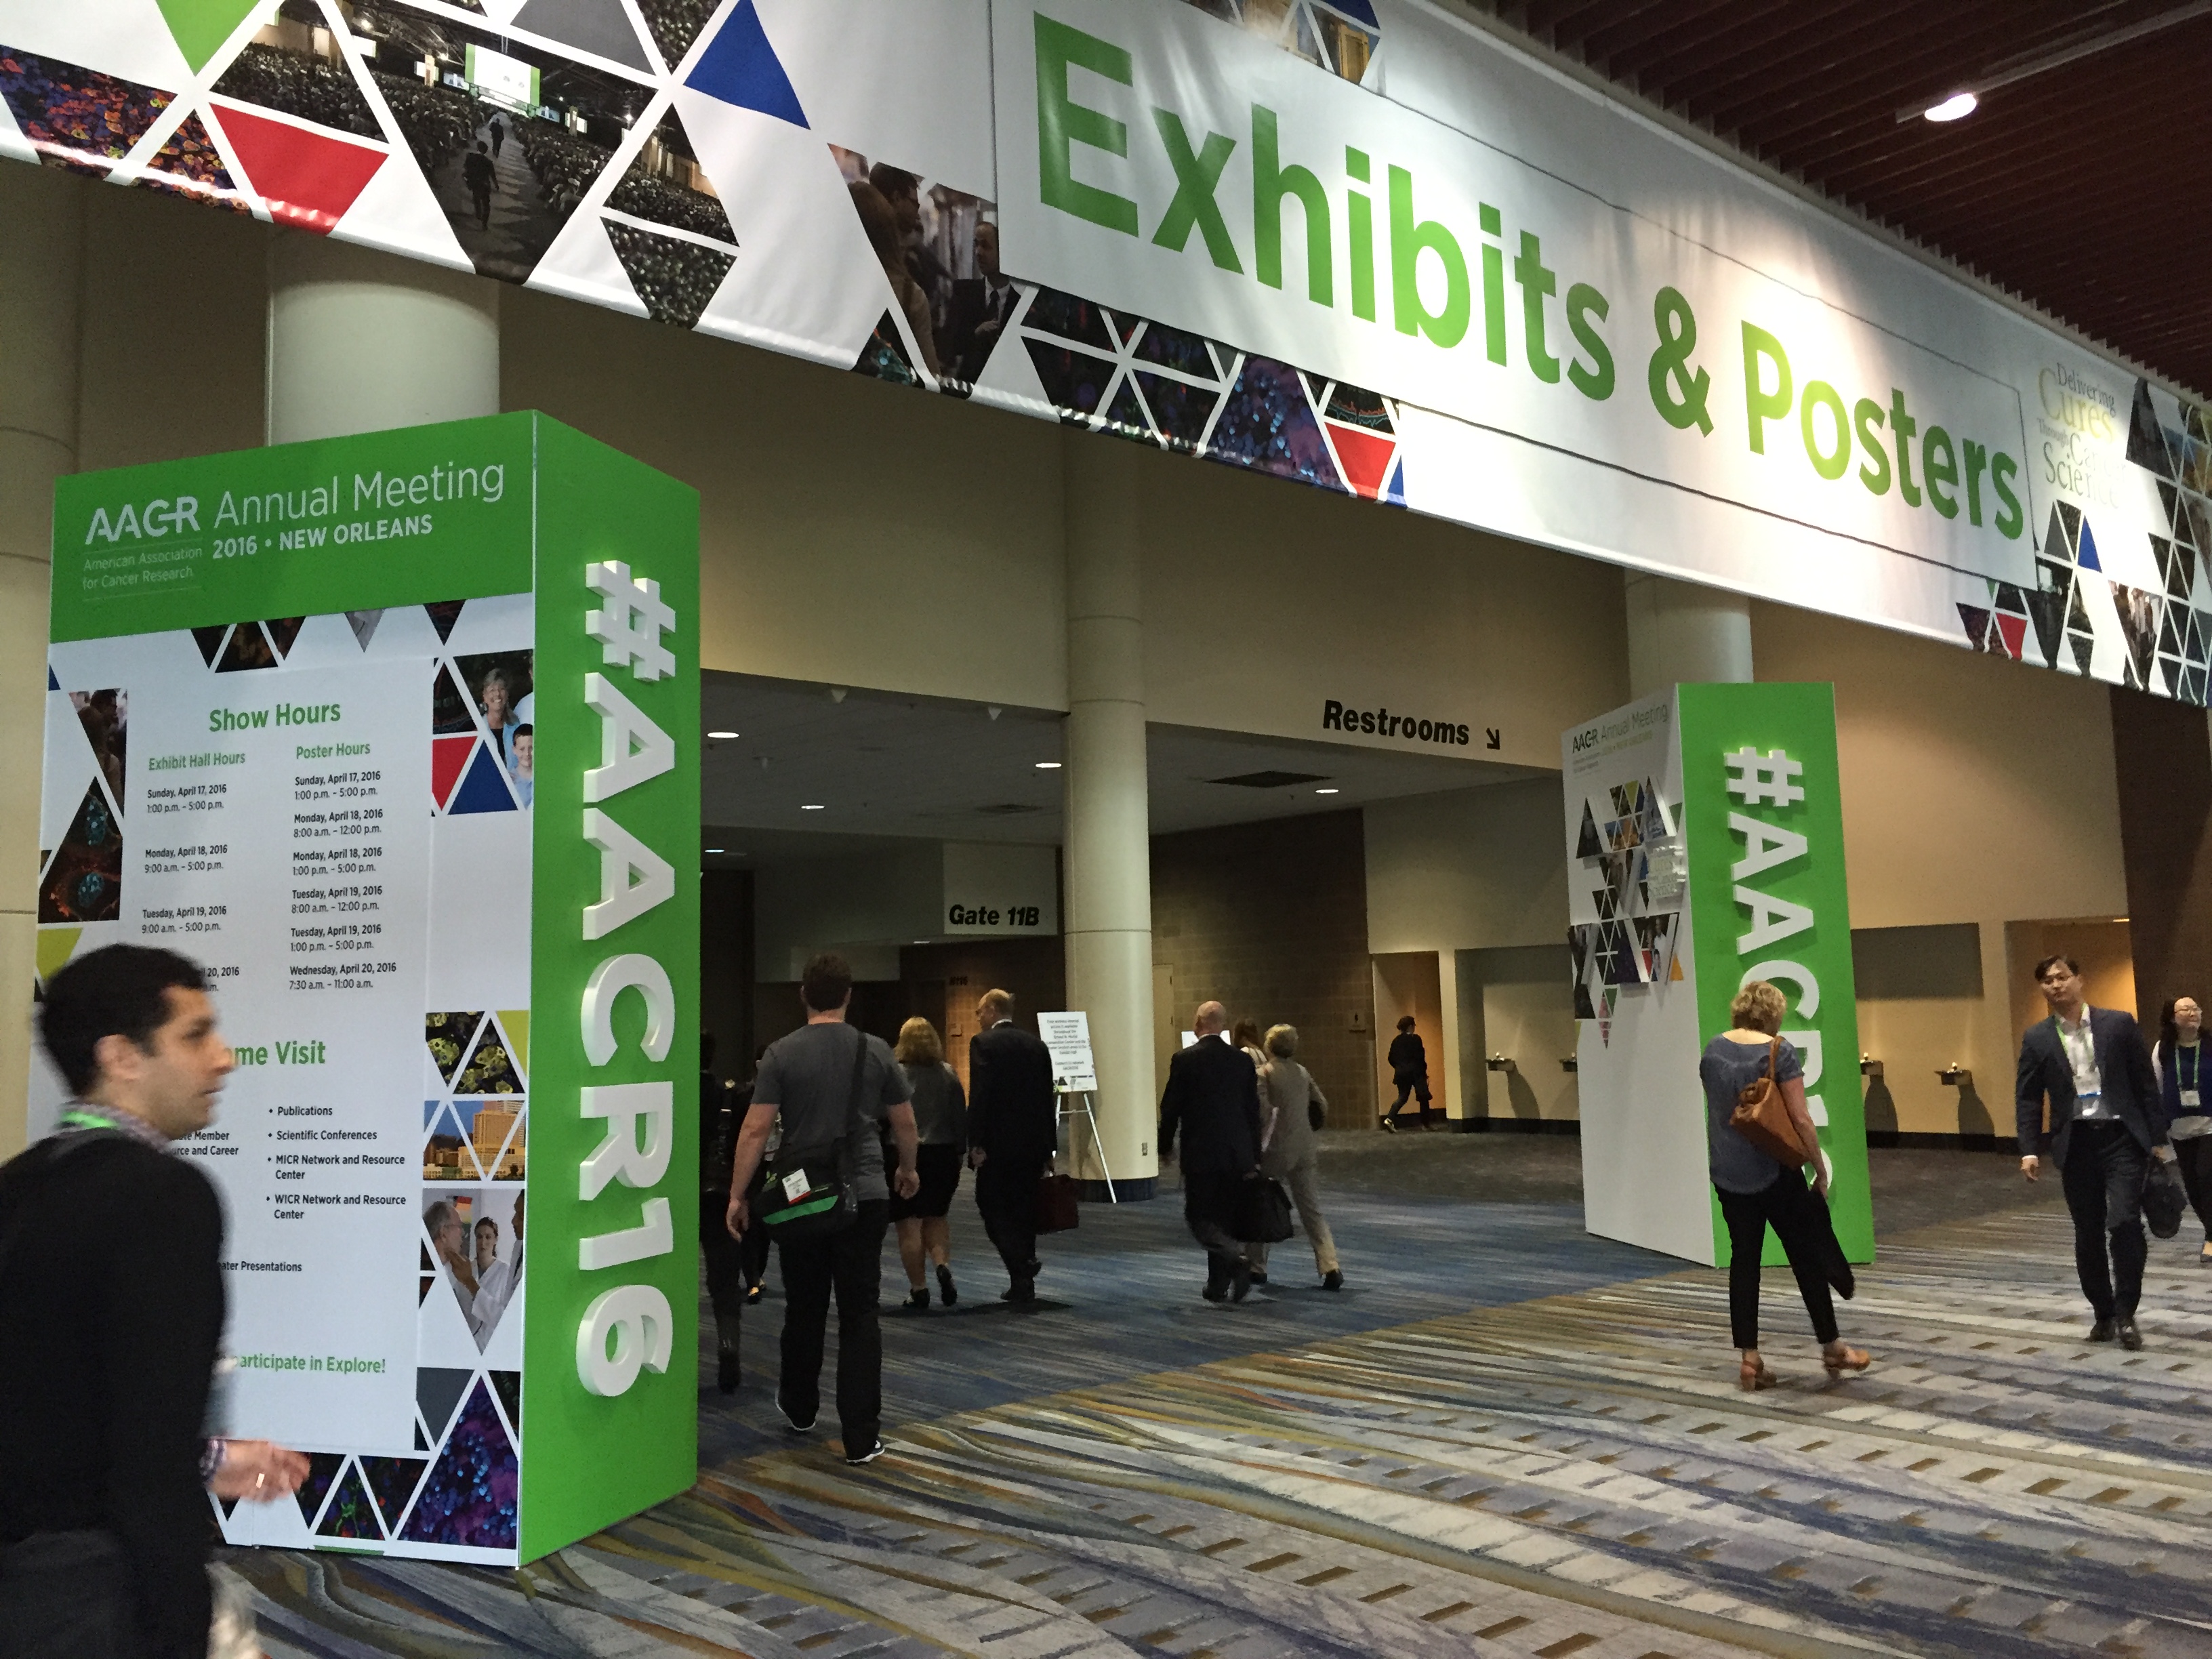 At AACR 2016 New Orleans